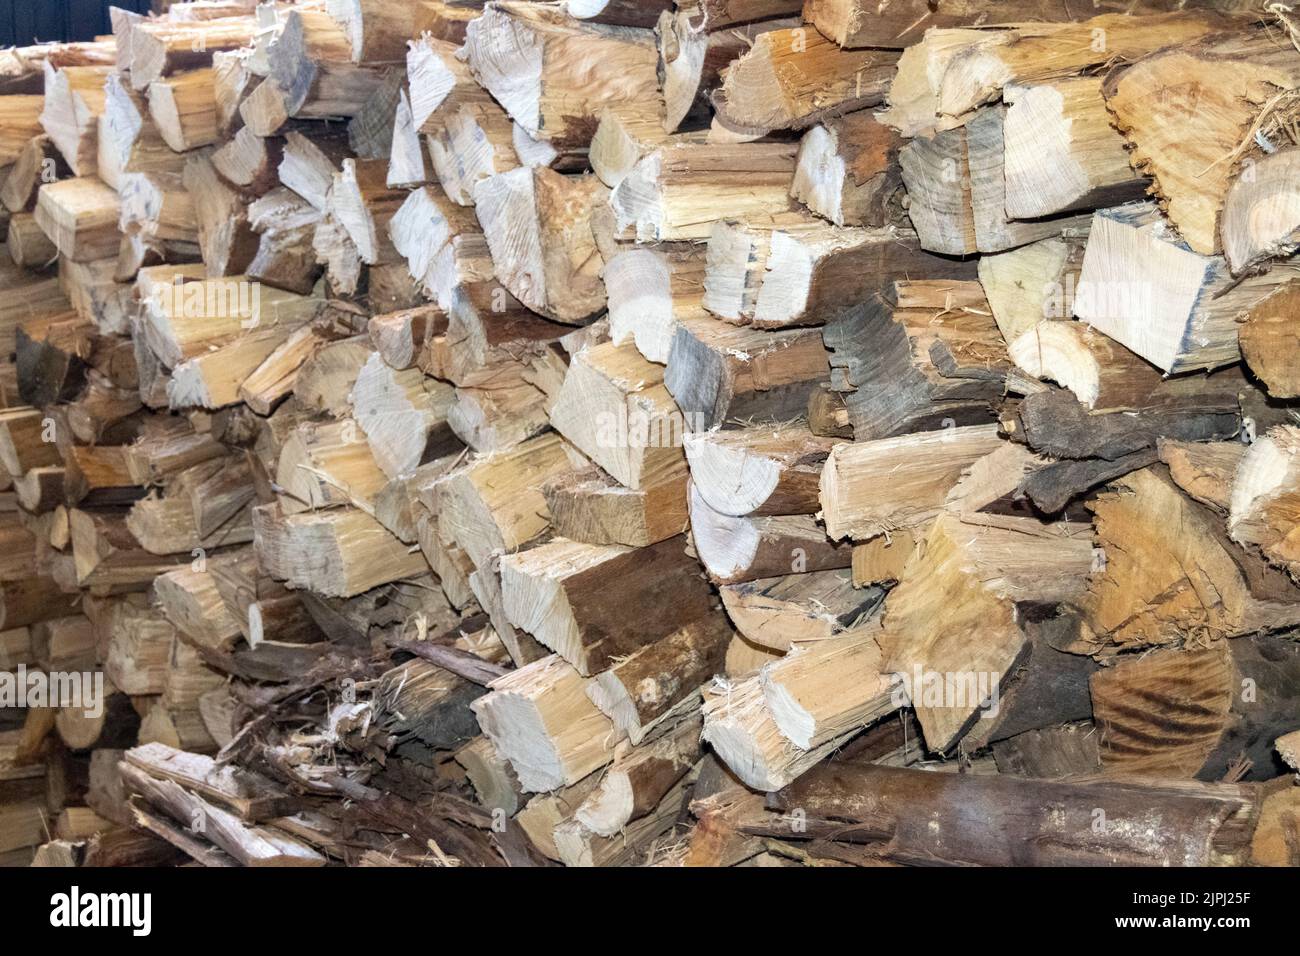 Wood storage for winter times, energy high costs alternative for warming houses. Wood energy to use as fuel. Electricity and gas high costs. Stock Photo